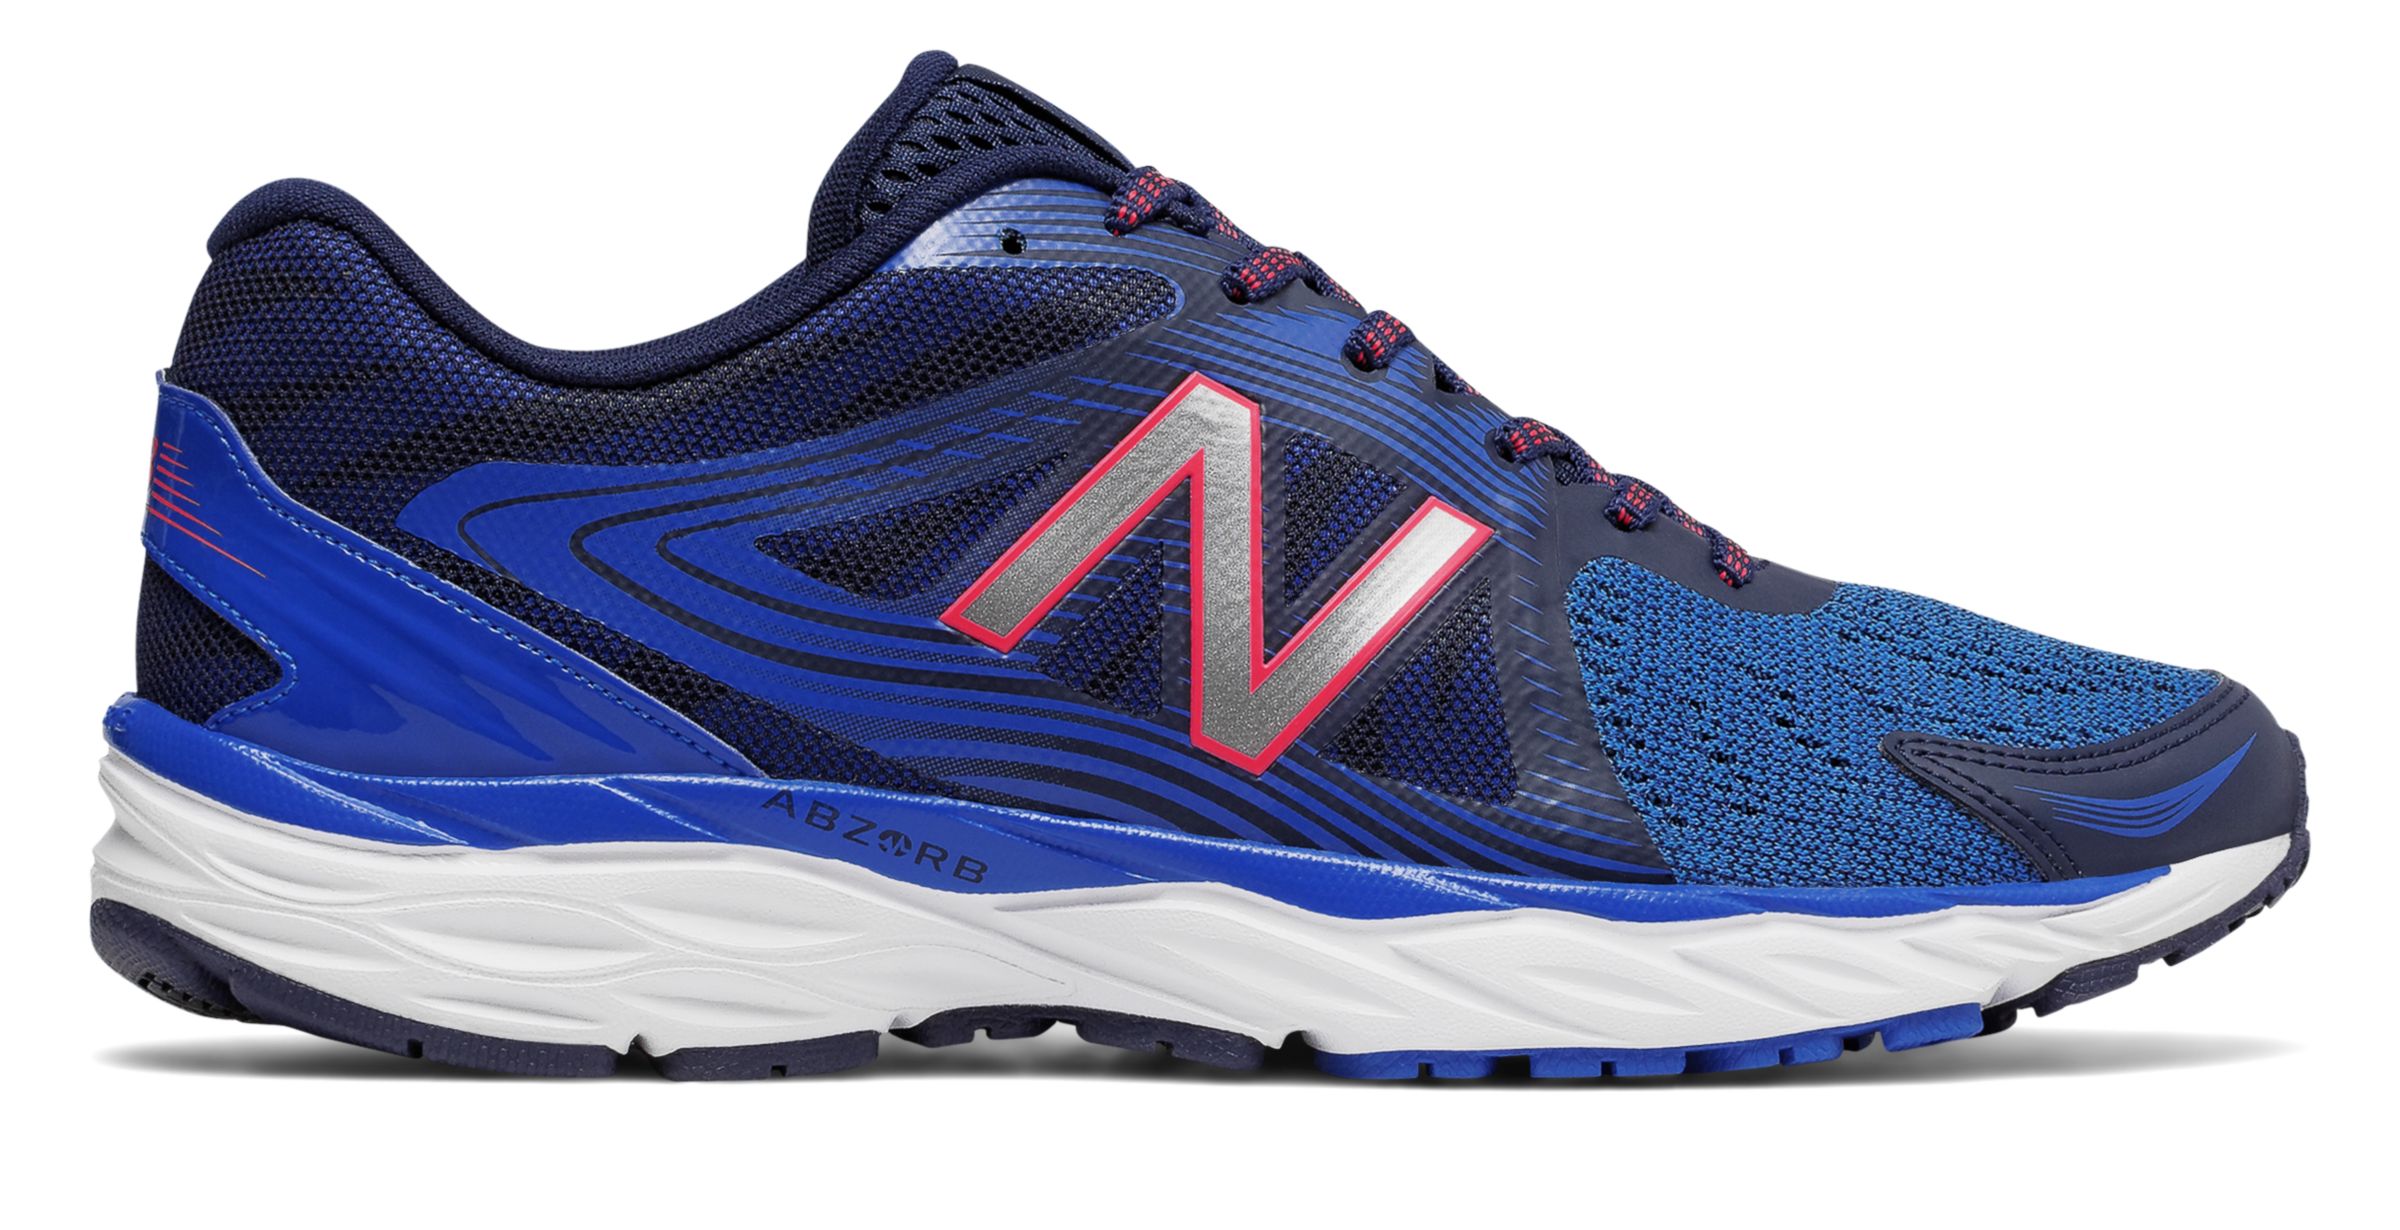 New Balance M680-V4 on Sale - Discounts Up to 66% Off on M680RG4 at Joe's New  Balance Outlet